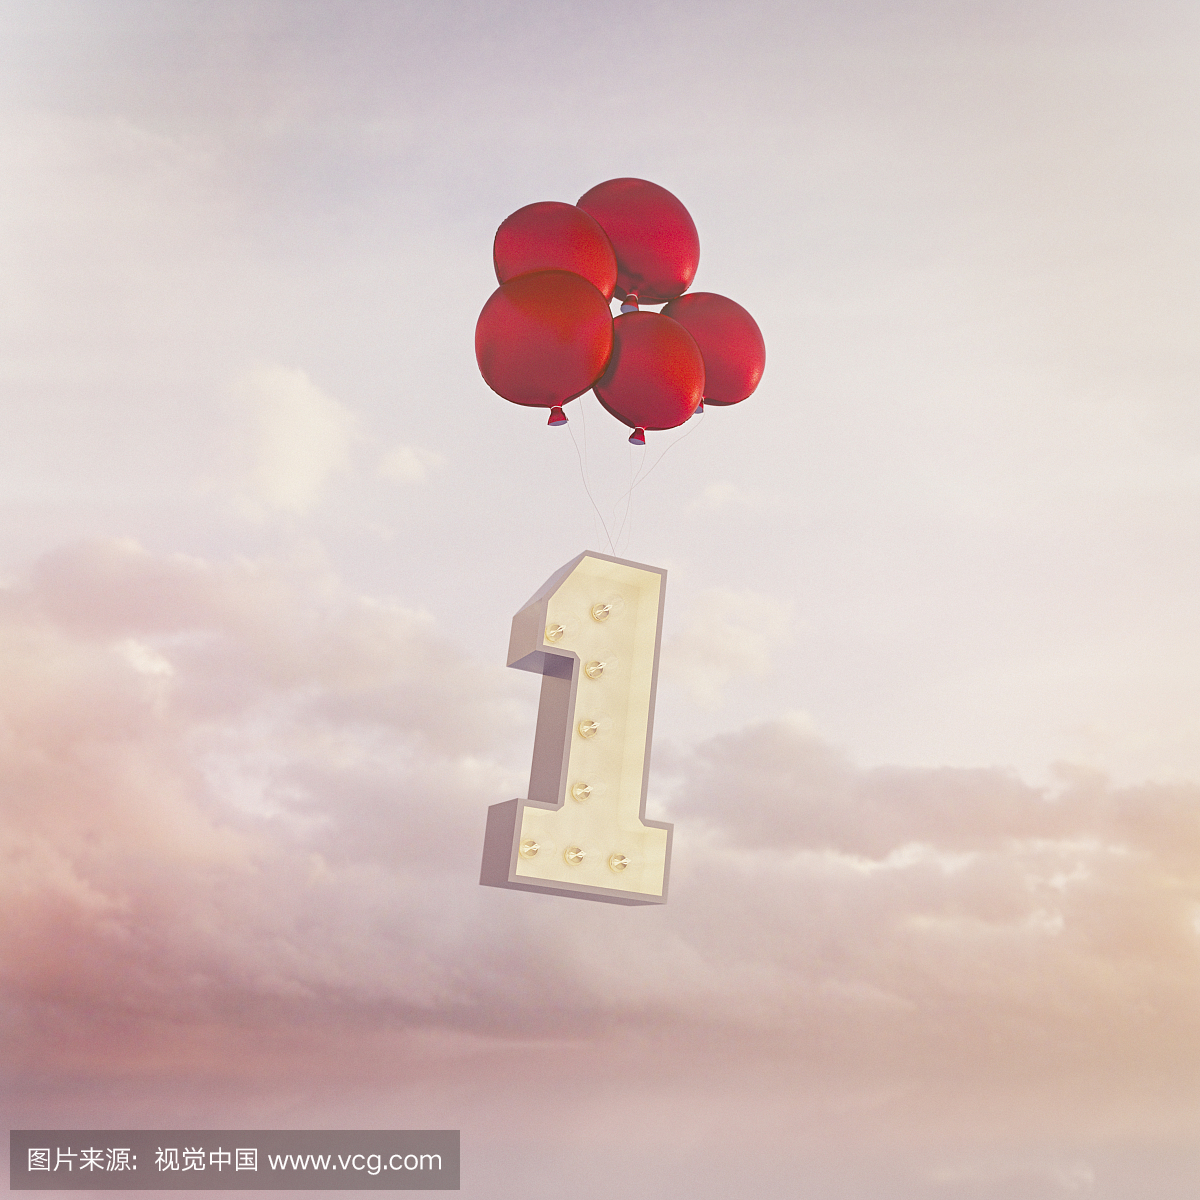 Number One floats away on red balloons